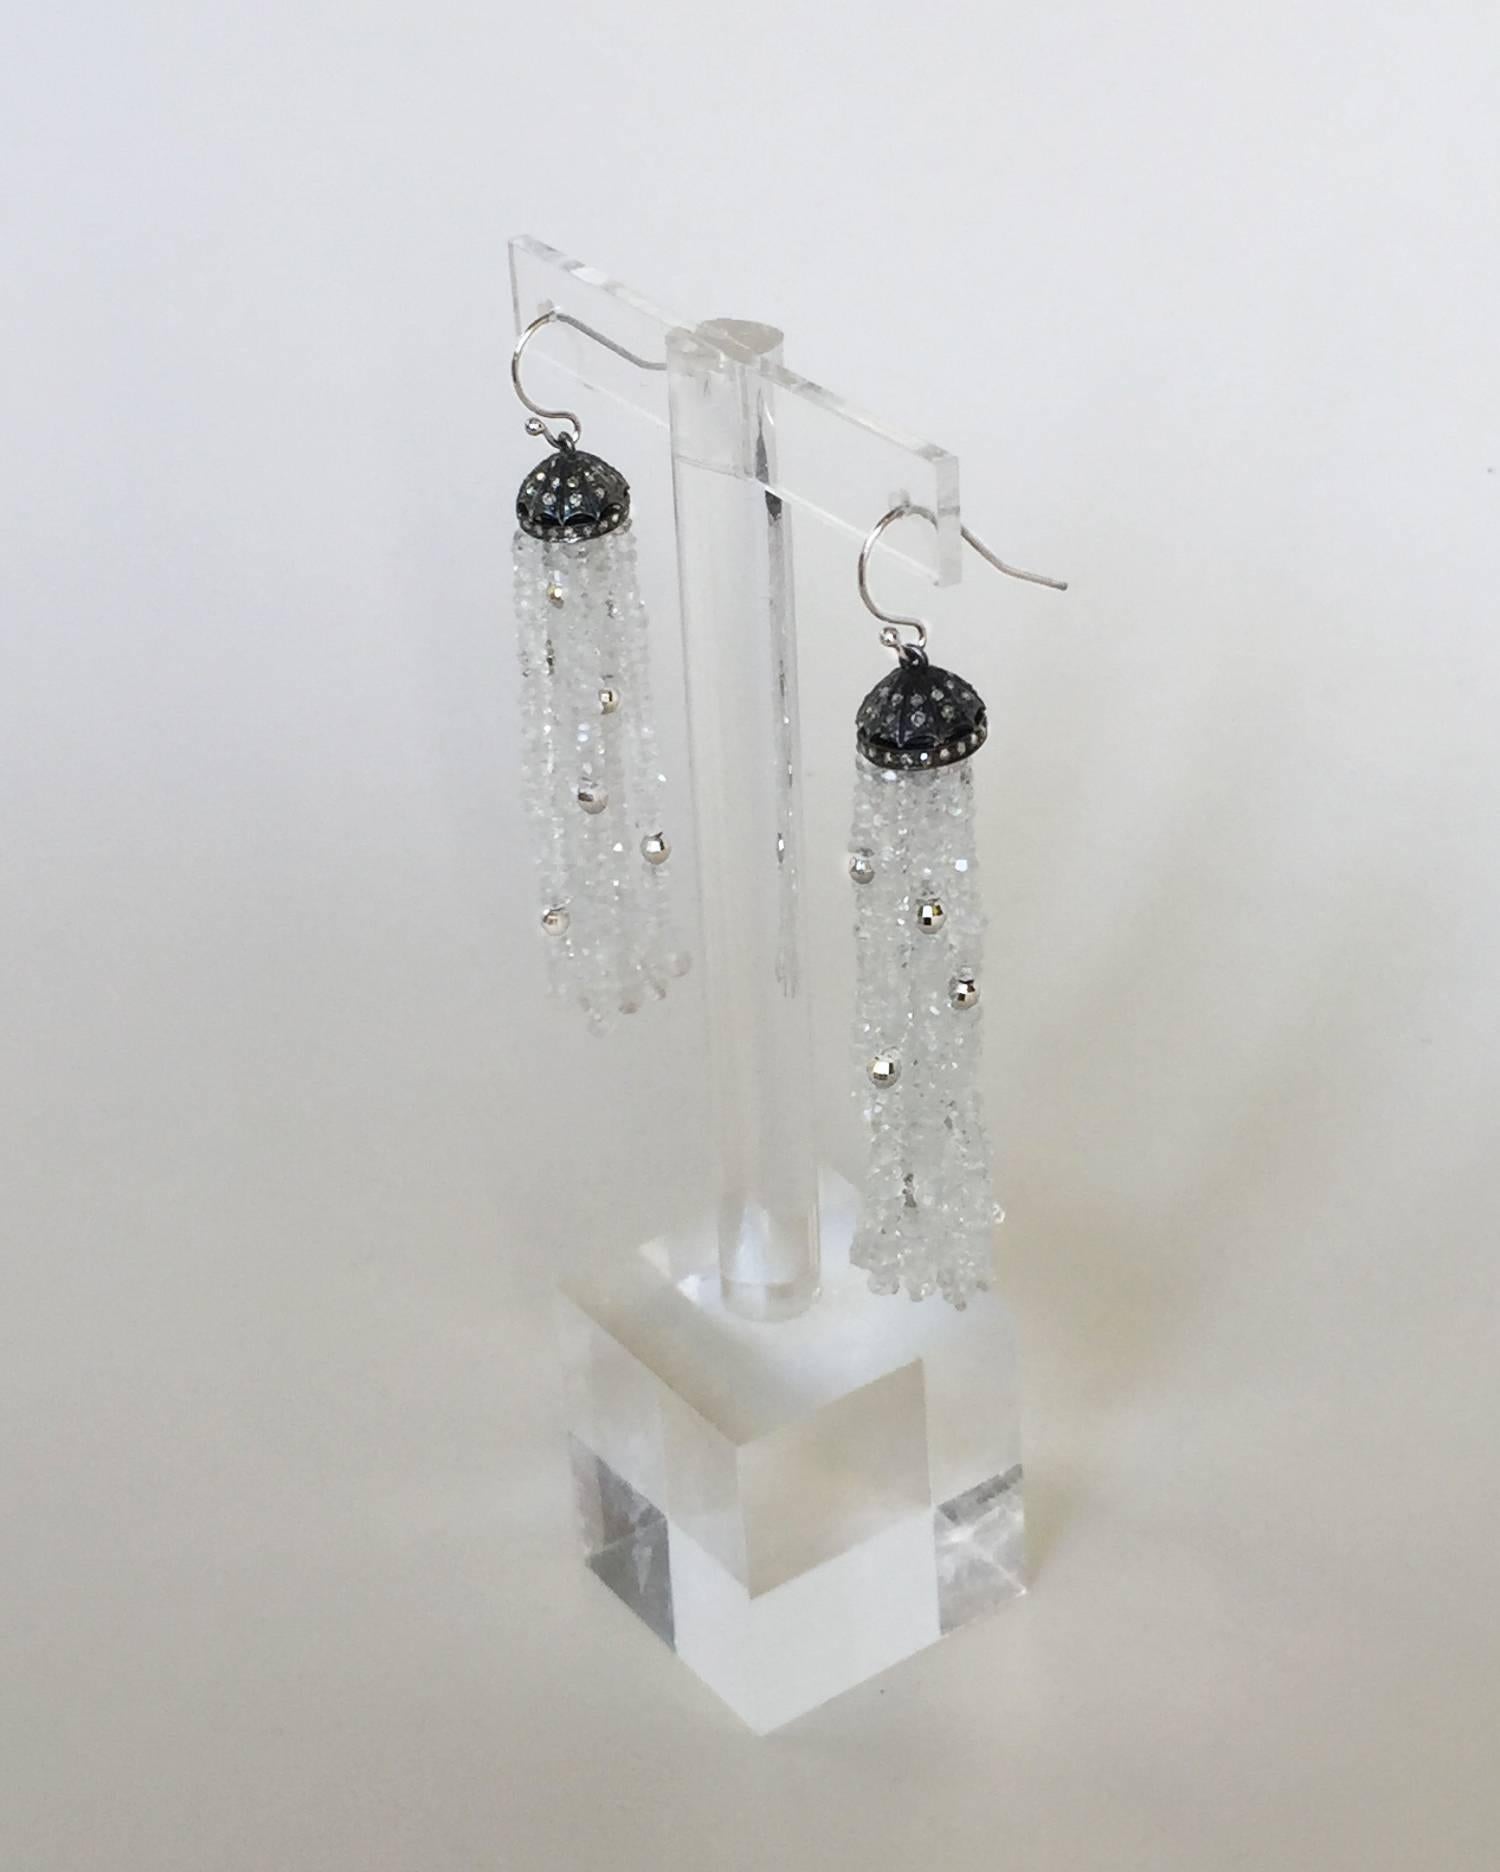 The white topaz with silver faceted beaded tassel glisten like fresh snow. The diamond encrusted sterling silver cup highlights the tassels perfectly. The earring hangs from 14k white gold hook at 2.5 inches. The ever slightly graduated tassels